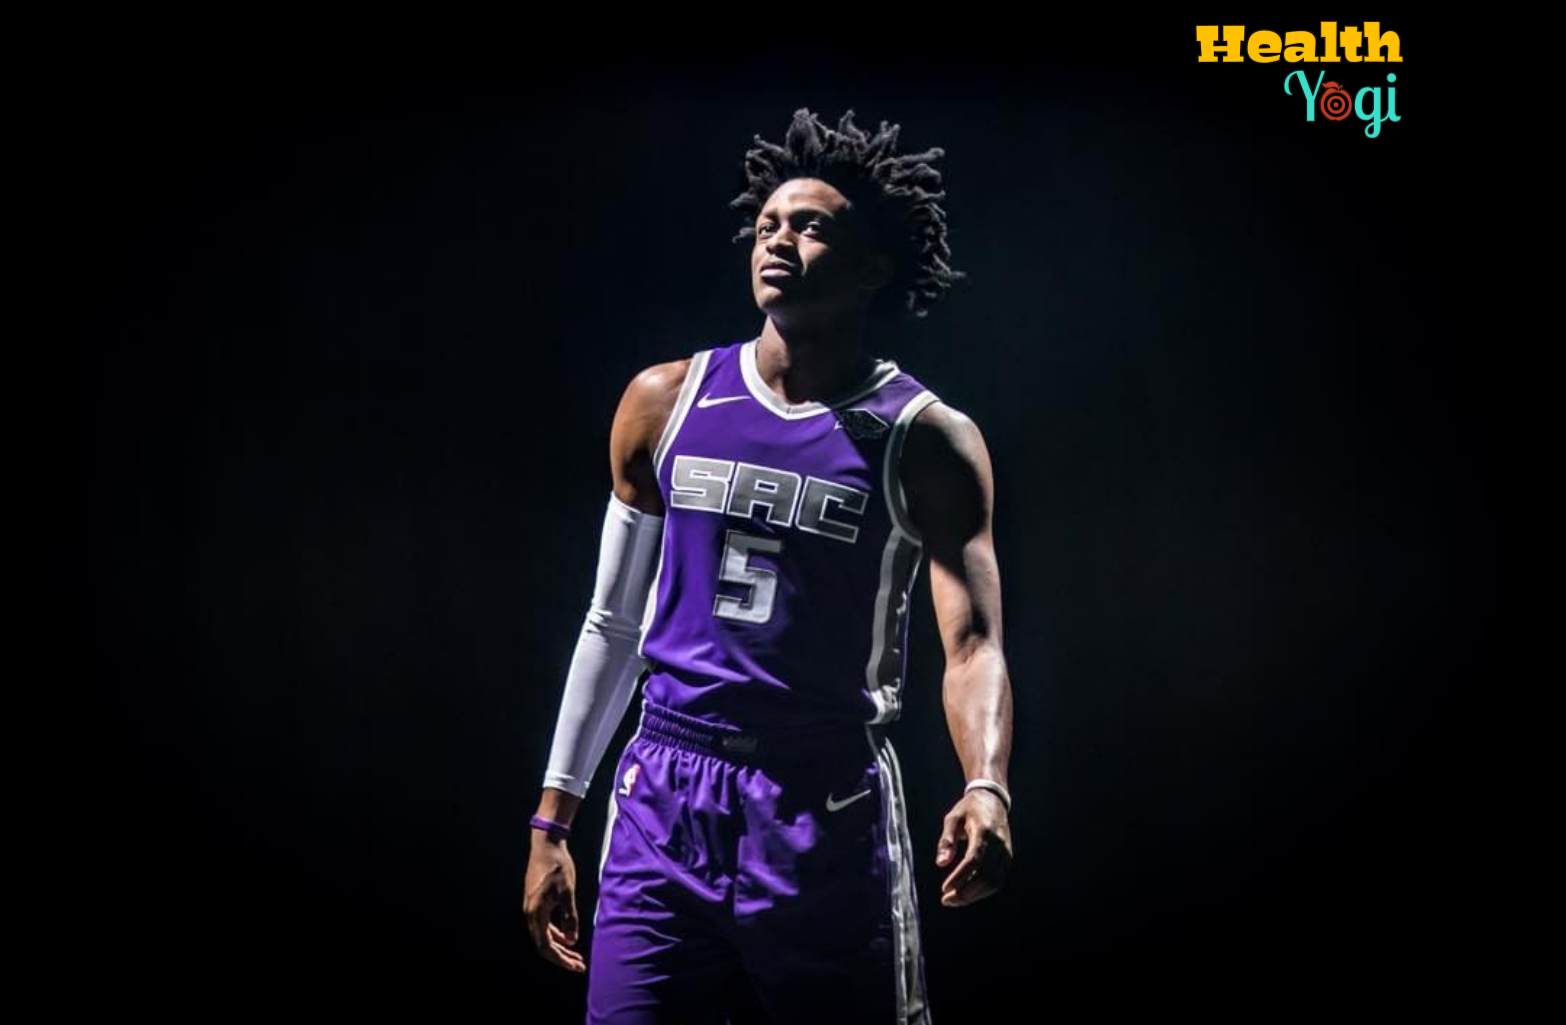 De'Aaron Fox exercise routine and meal plan